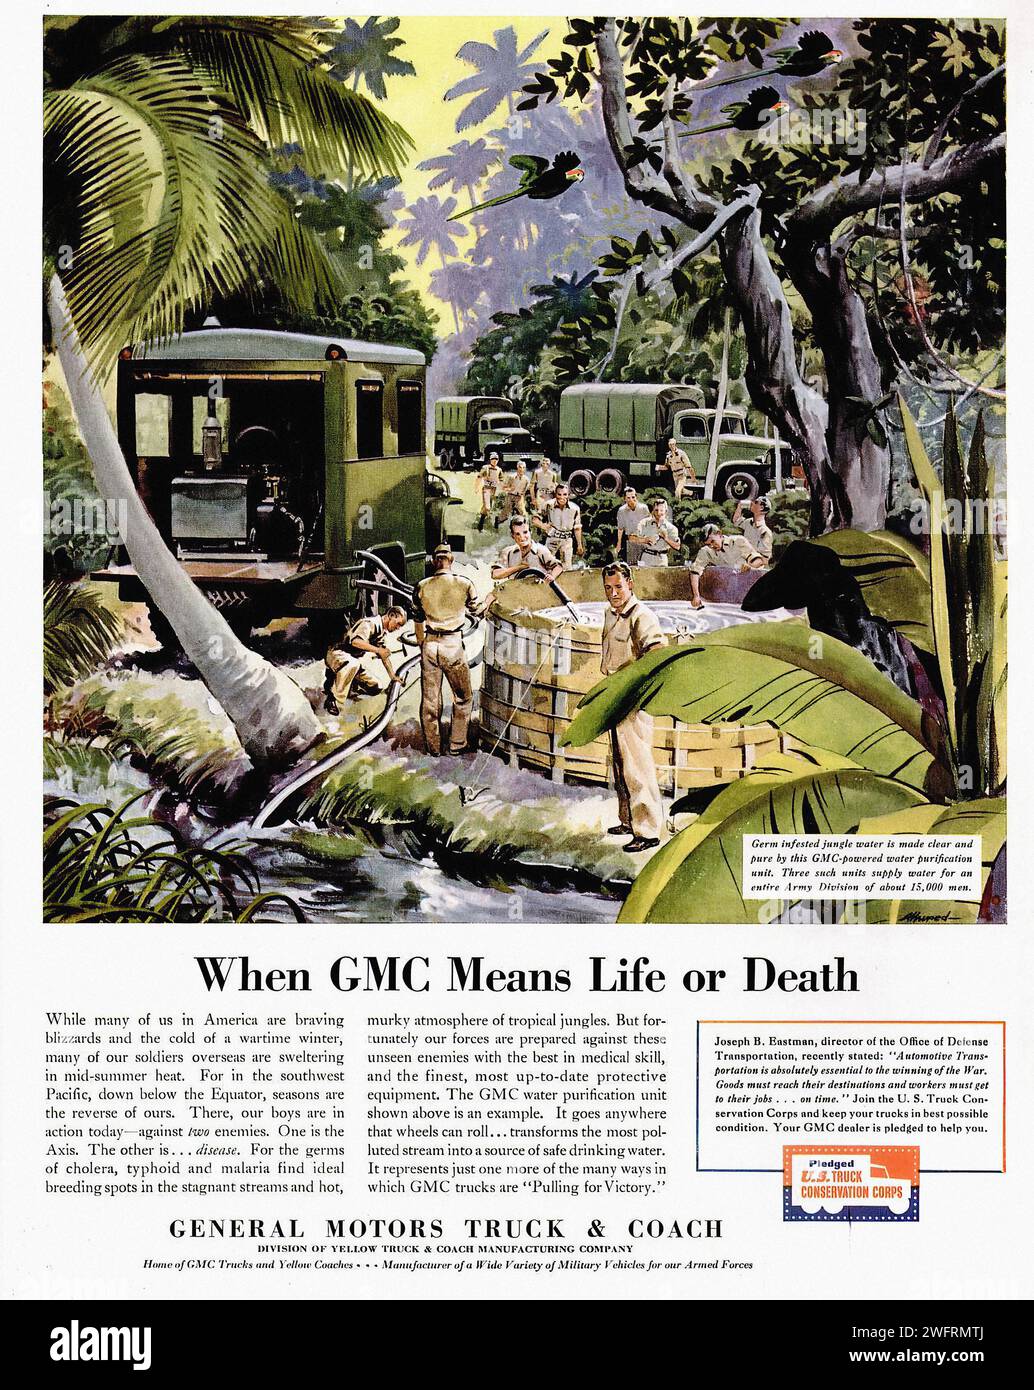 When GMC Means Life or Death While many of the war in America were being fought on the home front, the men of the 2nd Battalion, 4th Marines, were fighting in the jungles of the Pacific. They were fighting  A vintage advertisement for General Motors Truck & Coach featuring a colorful illustration of a truck in a tropical setting. The truck is green and has a sign on the side that reads “General Motors Truck & Coach”. The truck is surrounded by a group of people, some of whom are loading barrels onto the truck.- American (U.S.) advertising, World War II era Stock Photo